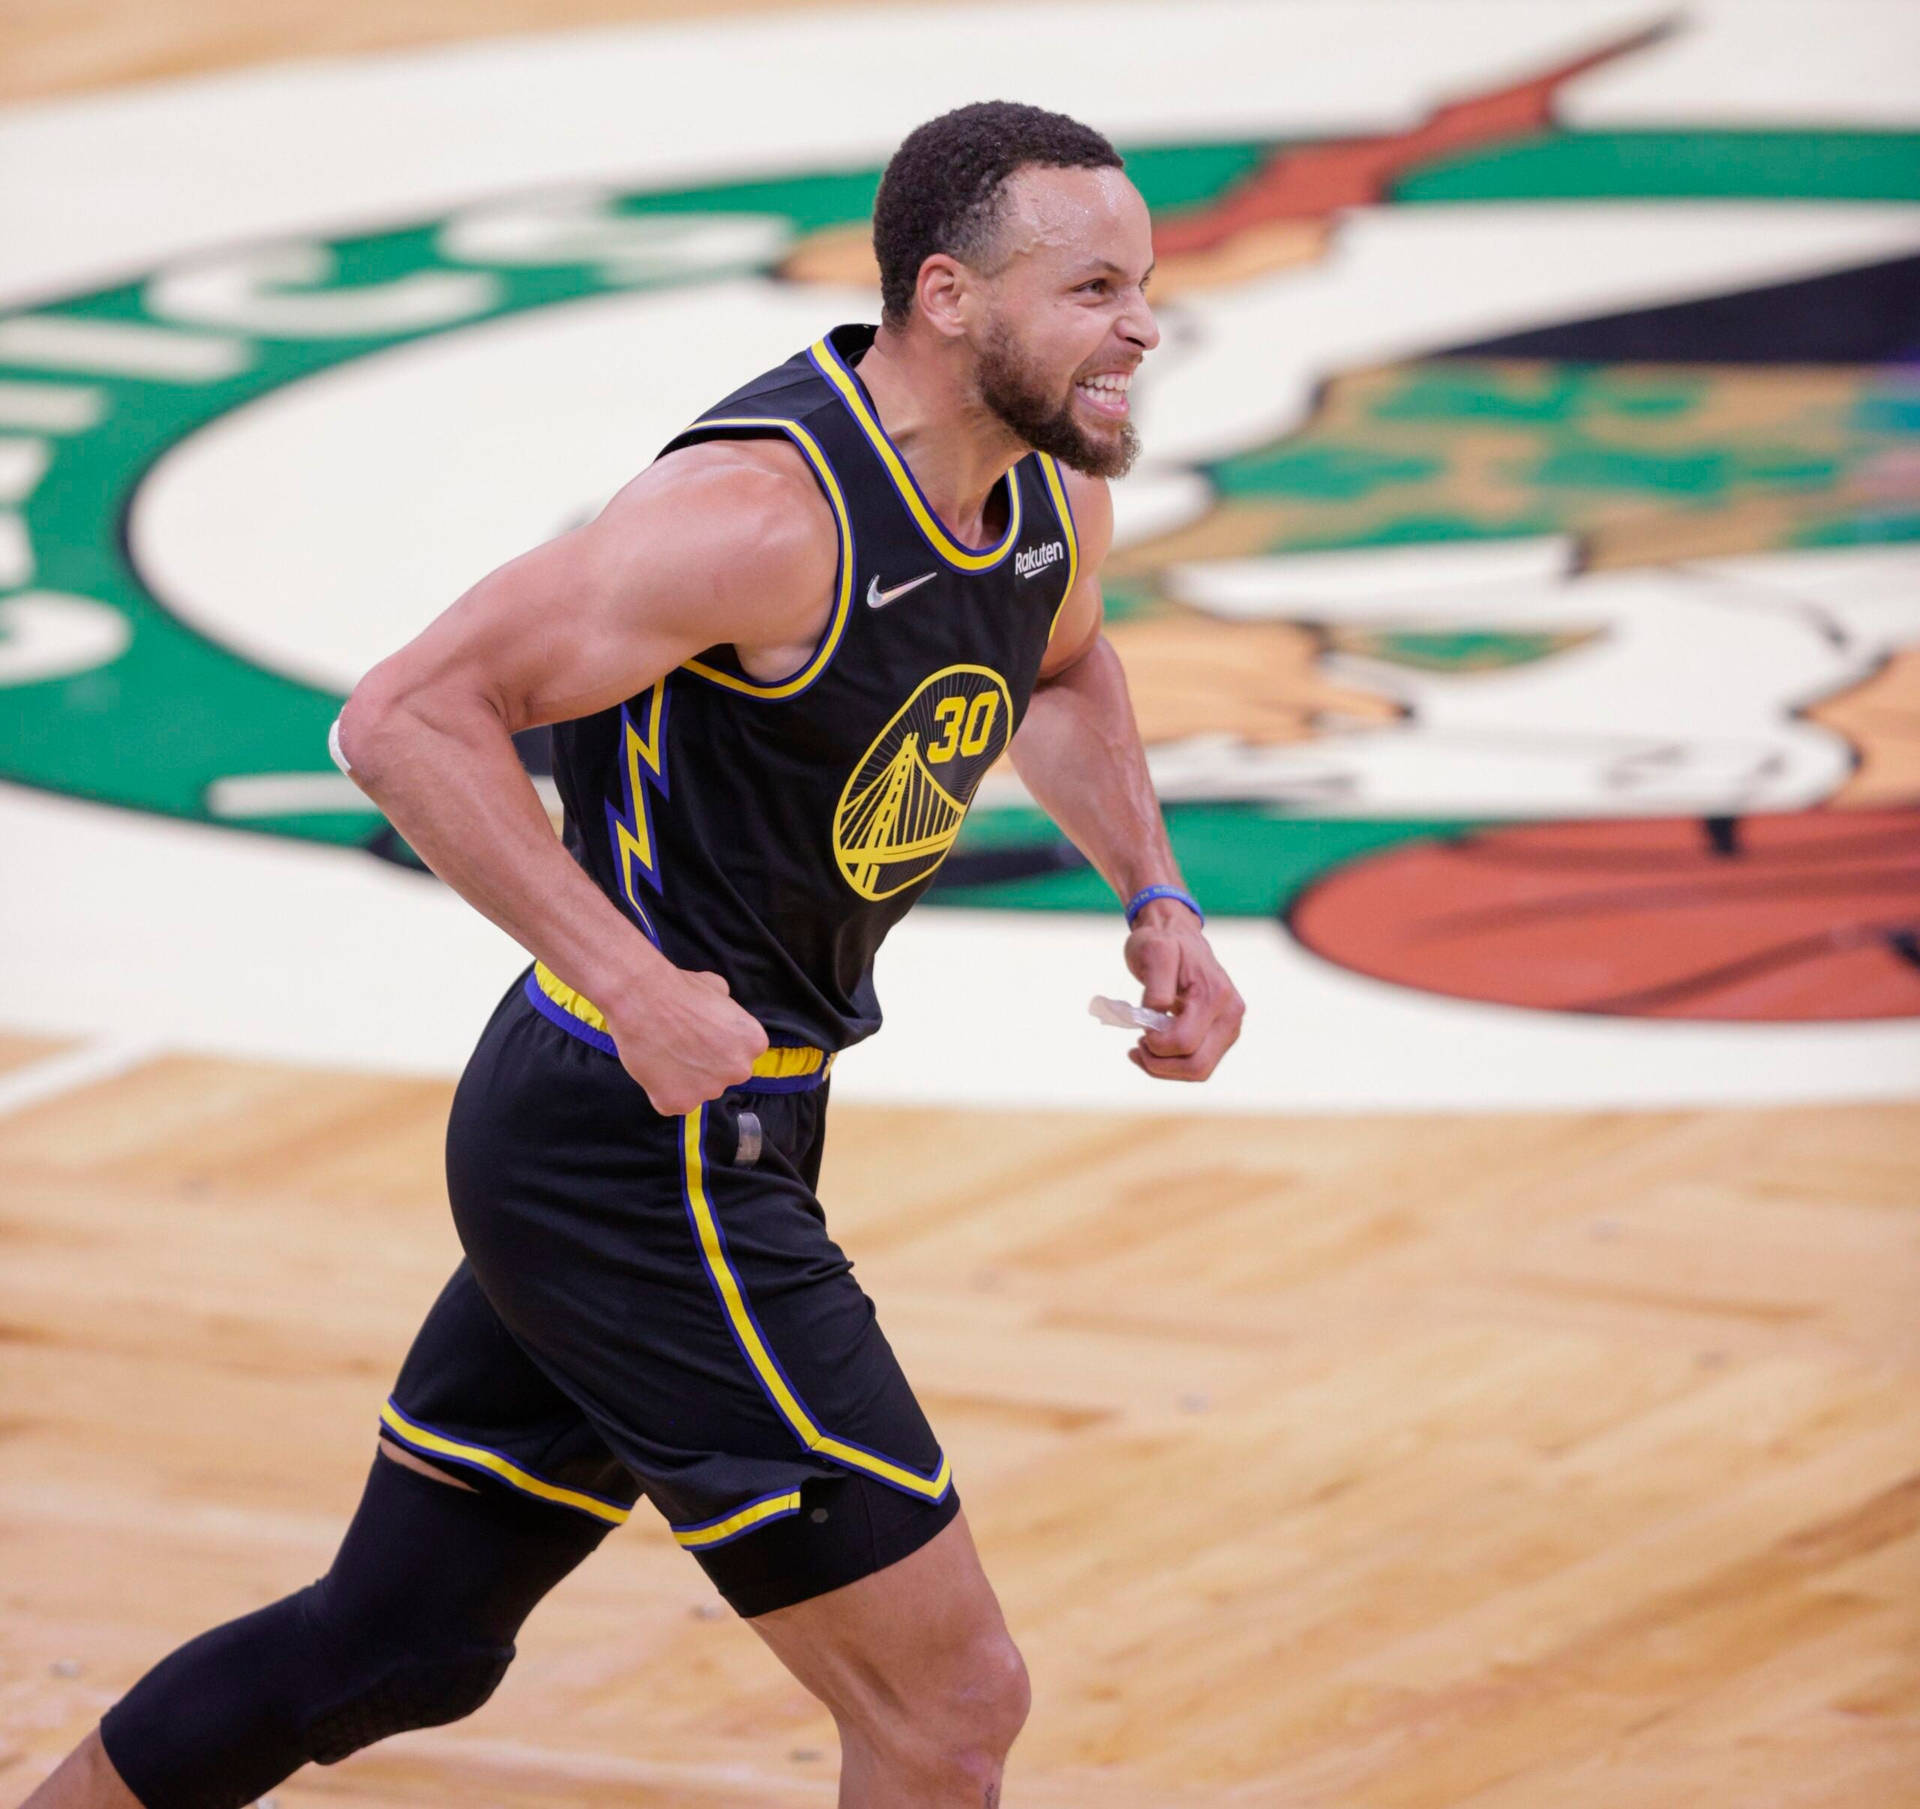 Steph Curry Running While Celebrating Background